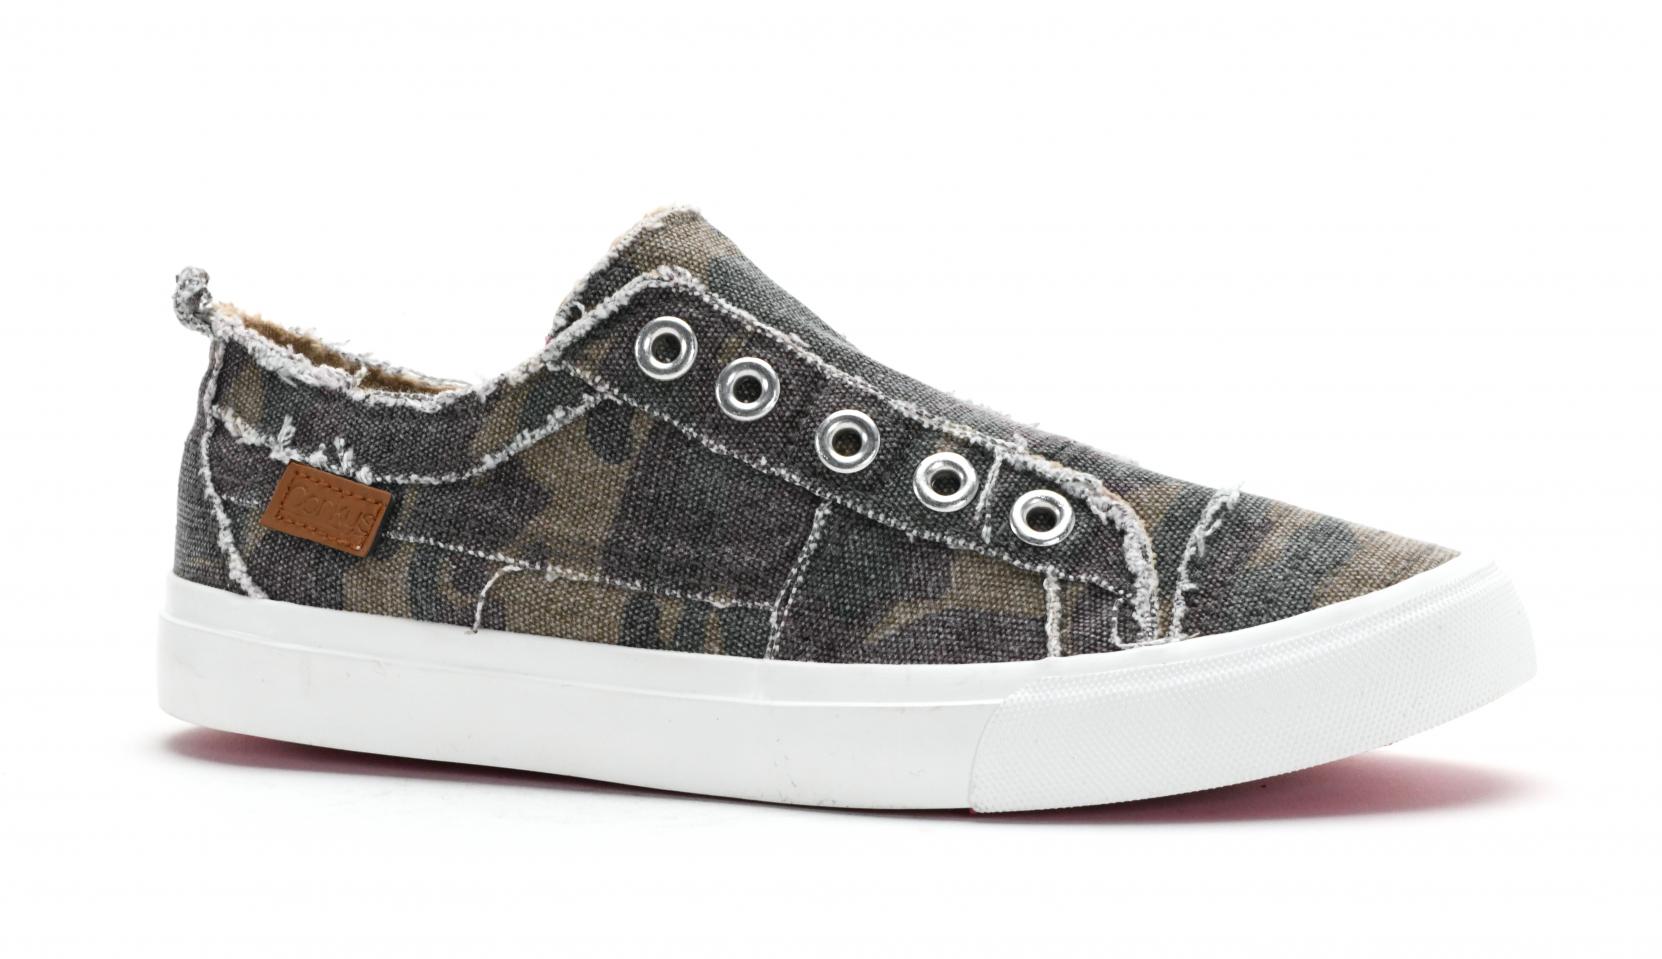 Corkys Shoes - Babalu Camo Sneaker  SALE 40% OFF  NOW $22.95